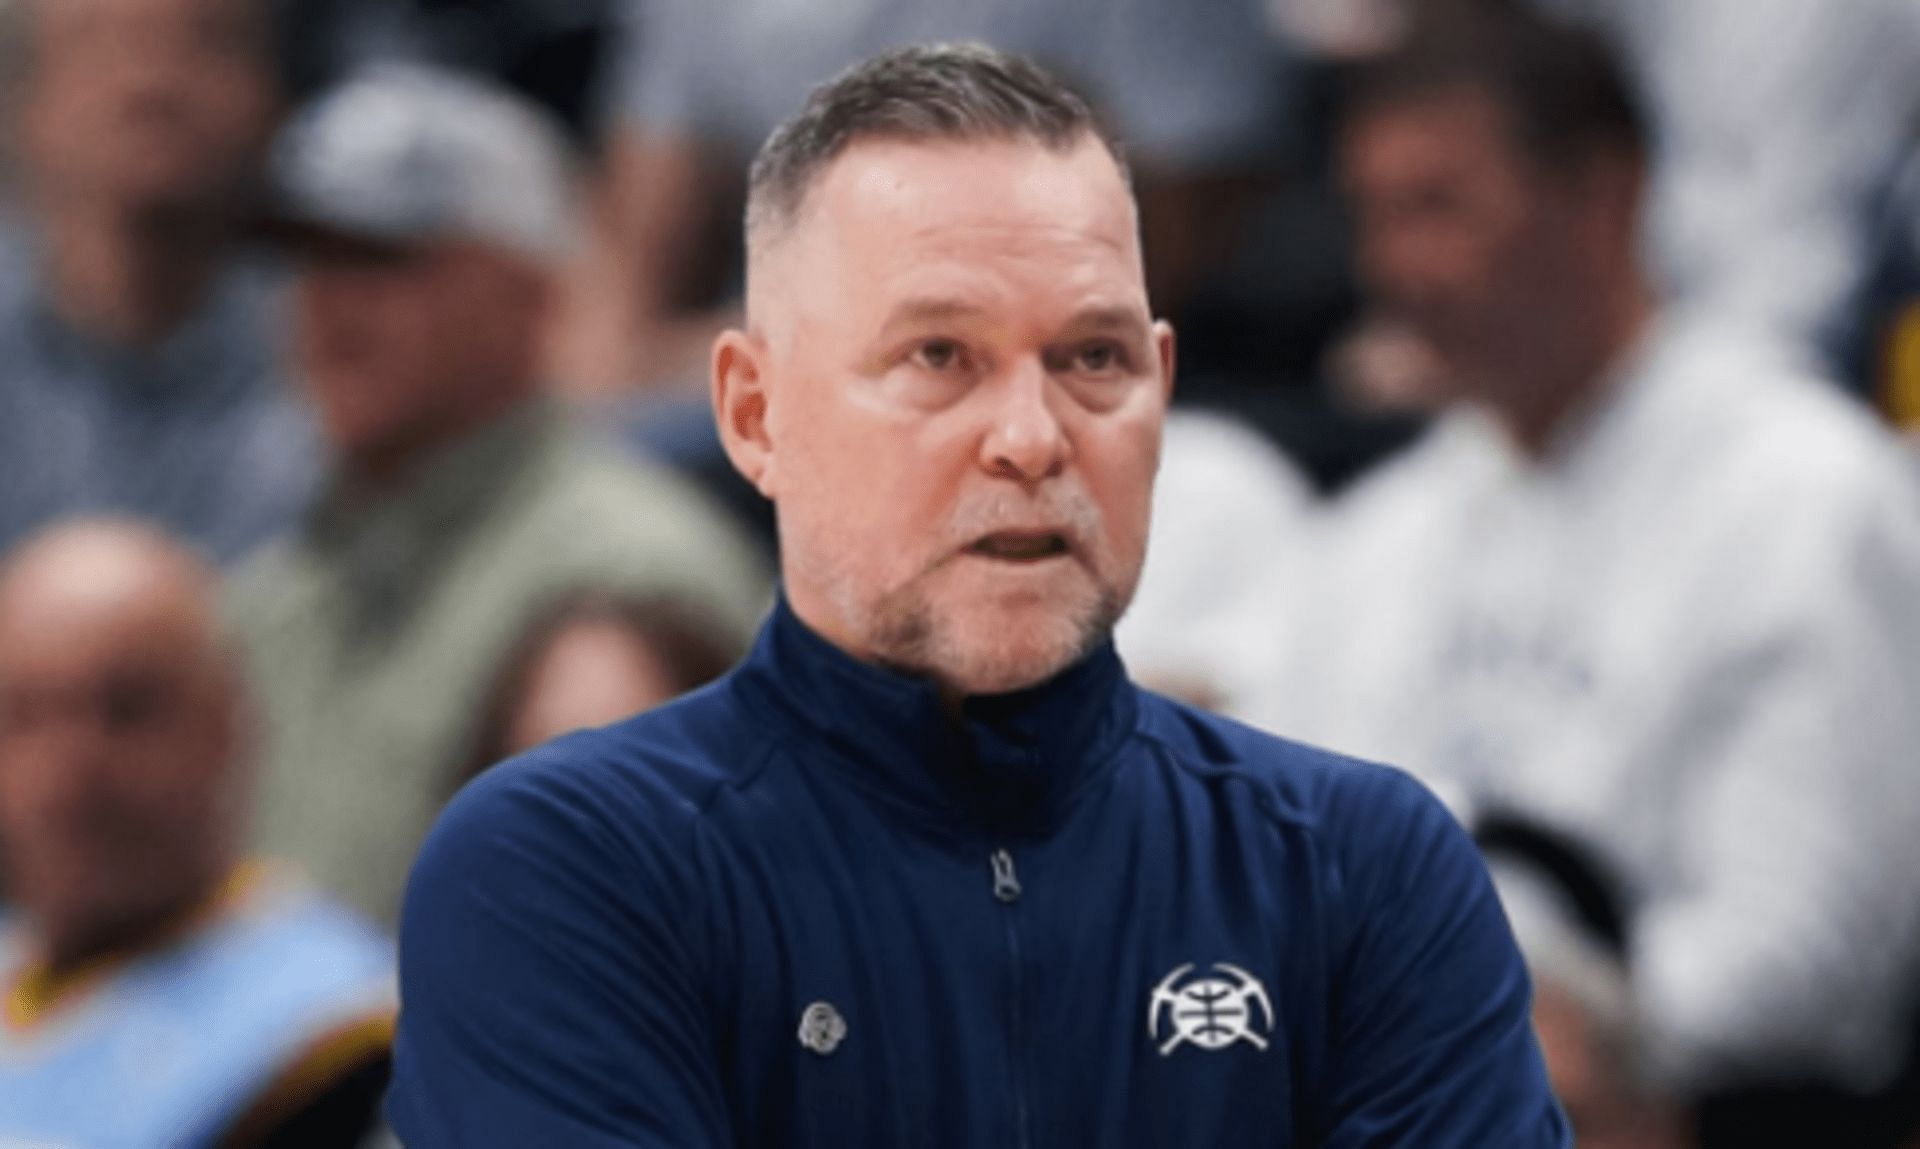 Michael Malone gets into altercation with Timberwolves fan